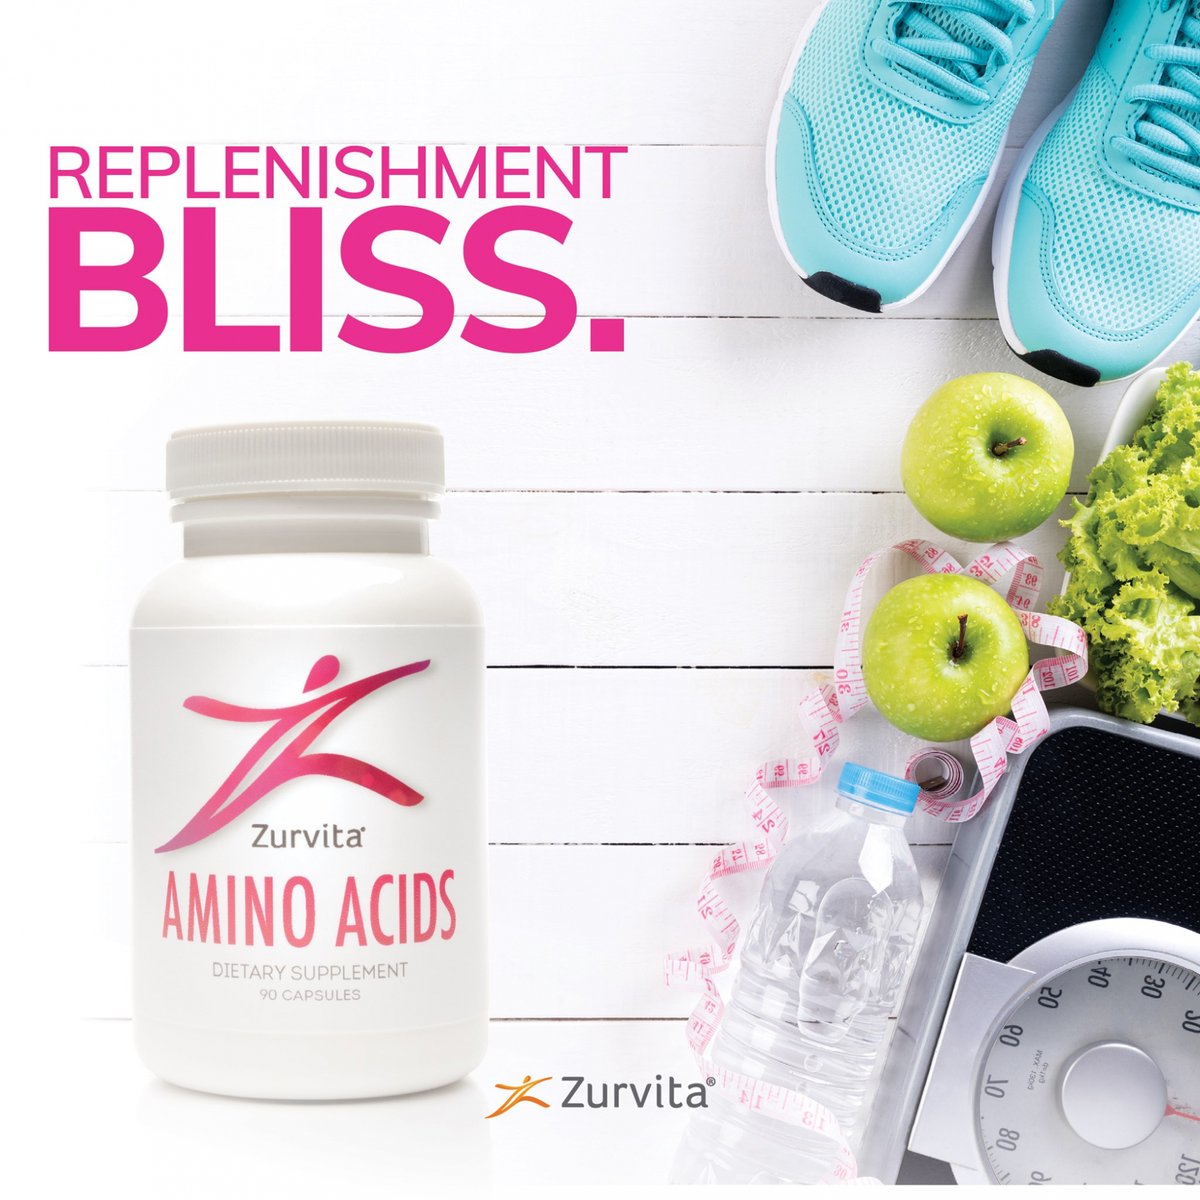 Power-up your workouts with Zurvita Amino Acids. These building blocks of protein and can be used to increase endurance, promote lean body mass, provide muscle protection, and aid in faster recovery time. bit.ly/3T29lck #aminoacids #zurvita #buildmuscle #health